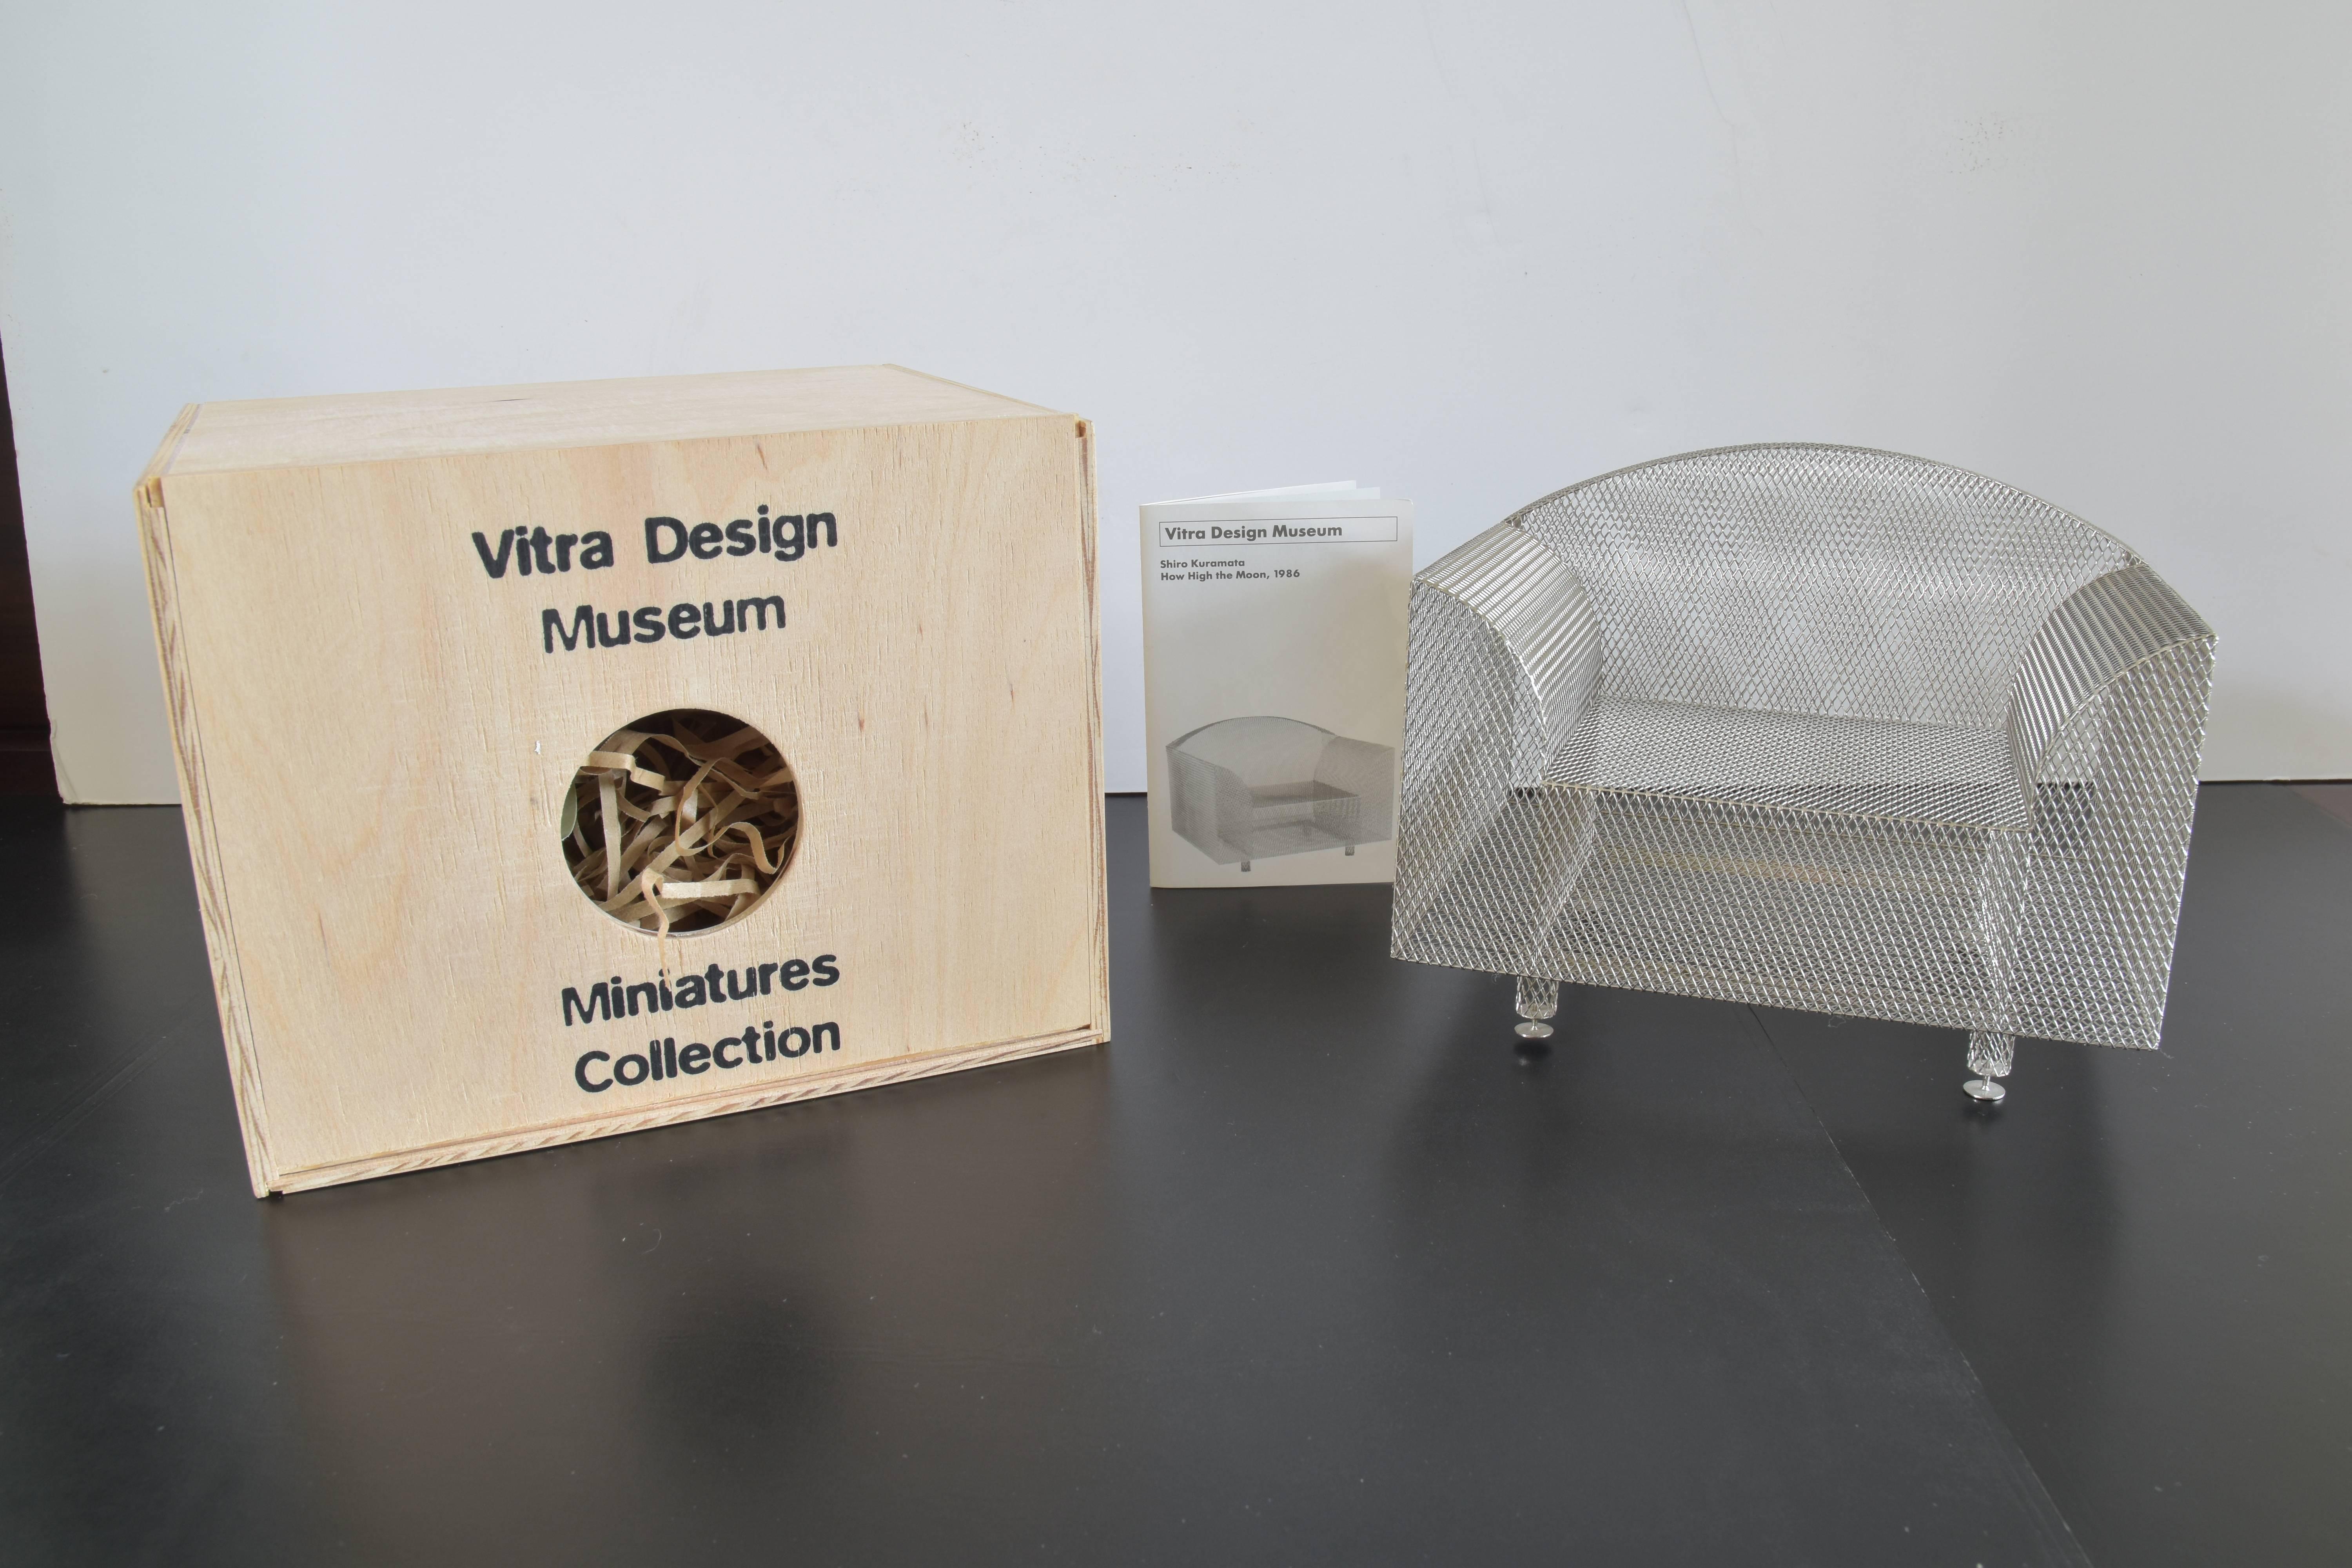 
This charming miniature is modeled on an original manufactured by Vitra, produced and distributed by the Vitra design museum with permission of Mieko Kuramata, Tokyo and Vitra.

Original wooden box and brochure are included with narrative